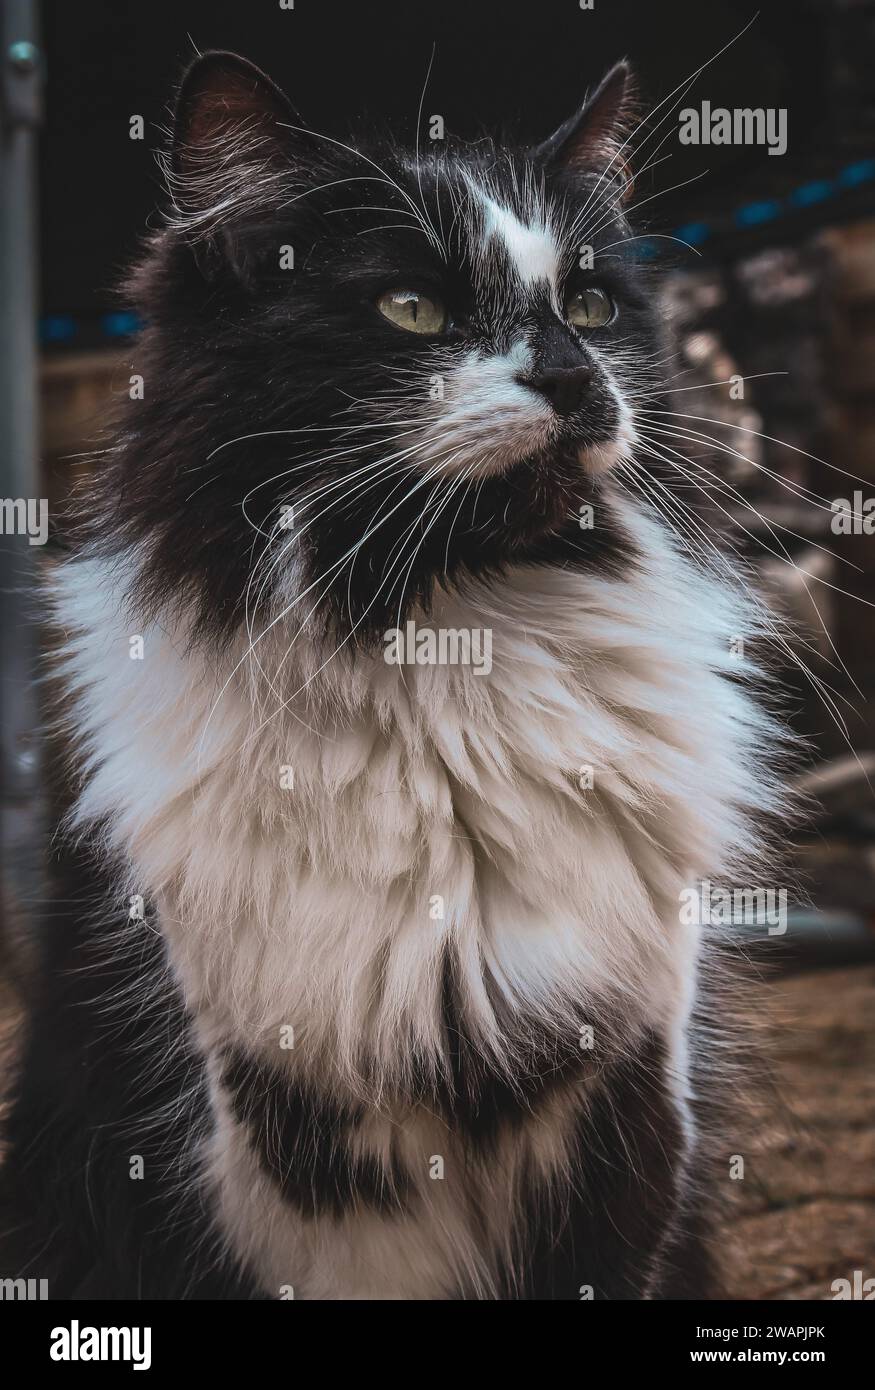 A vertical shot of a beautiful black and white domestic cat sitting in an upright position Stock Photo